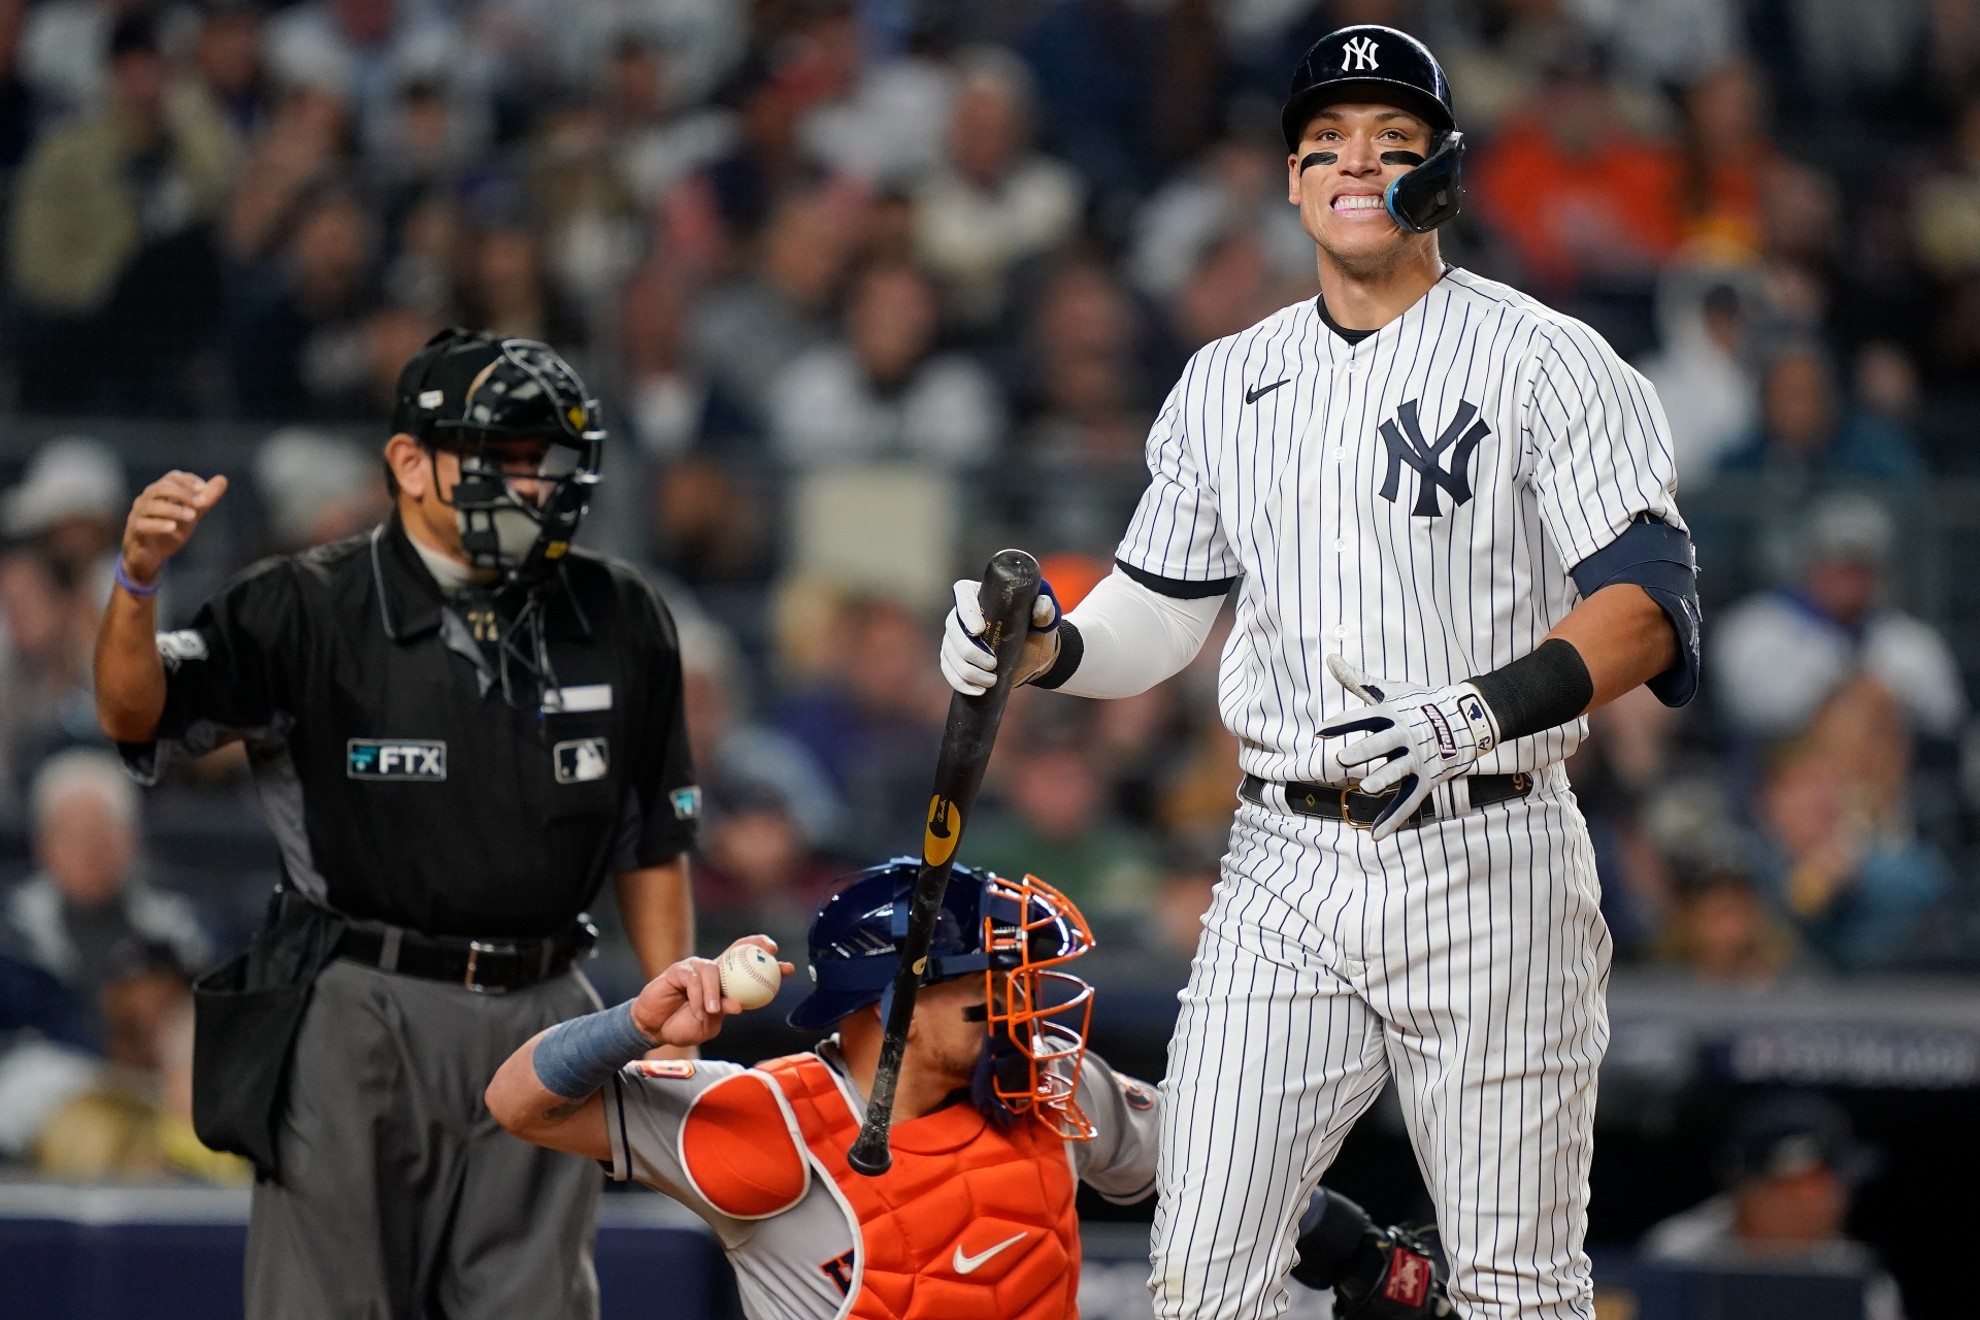 Aaron Judge could have played his last game as a Yankee.